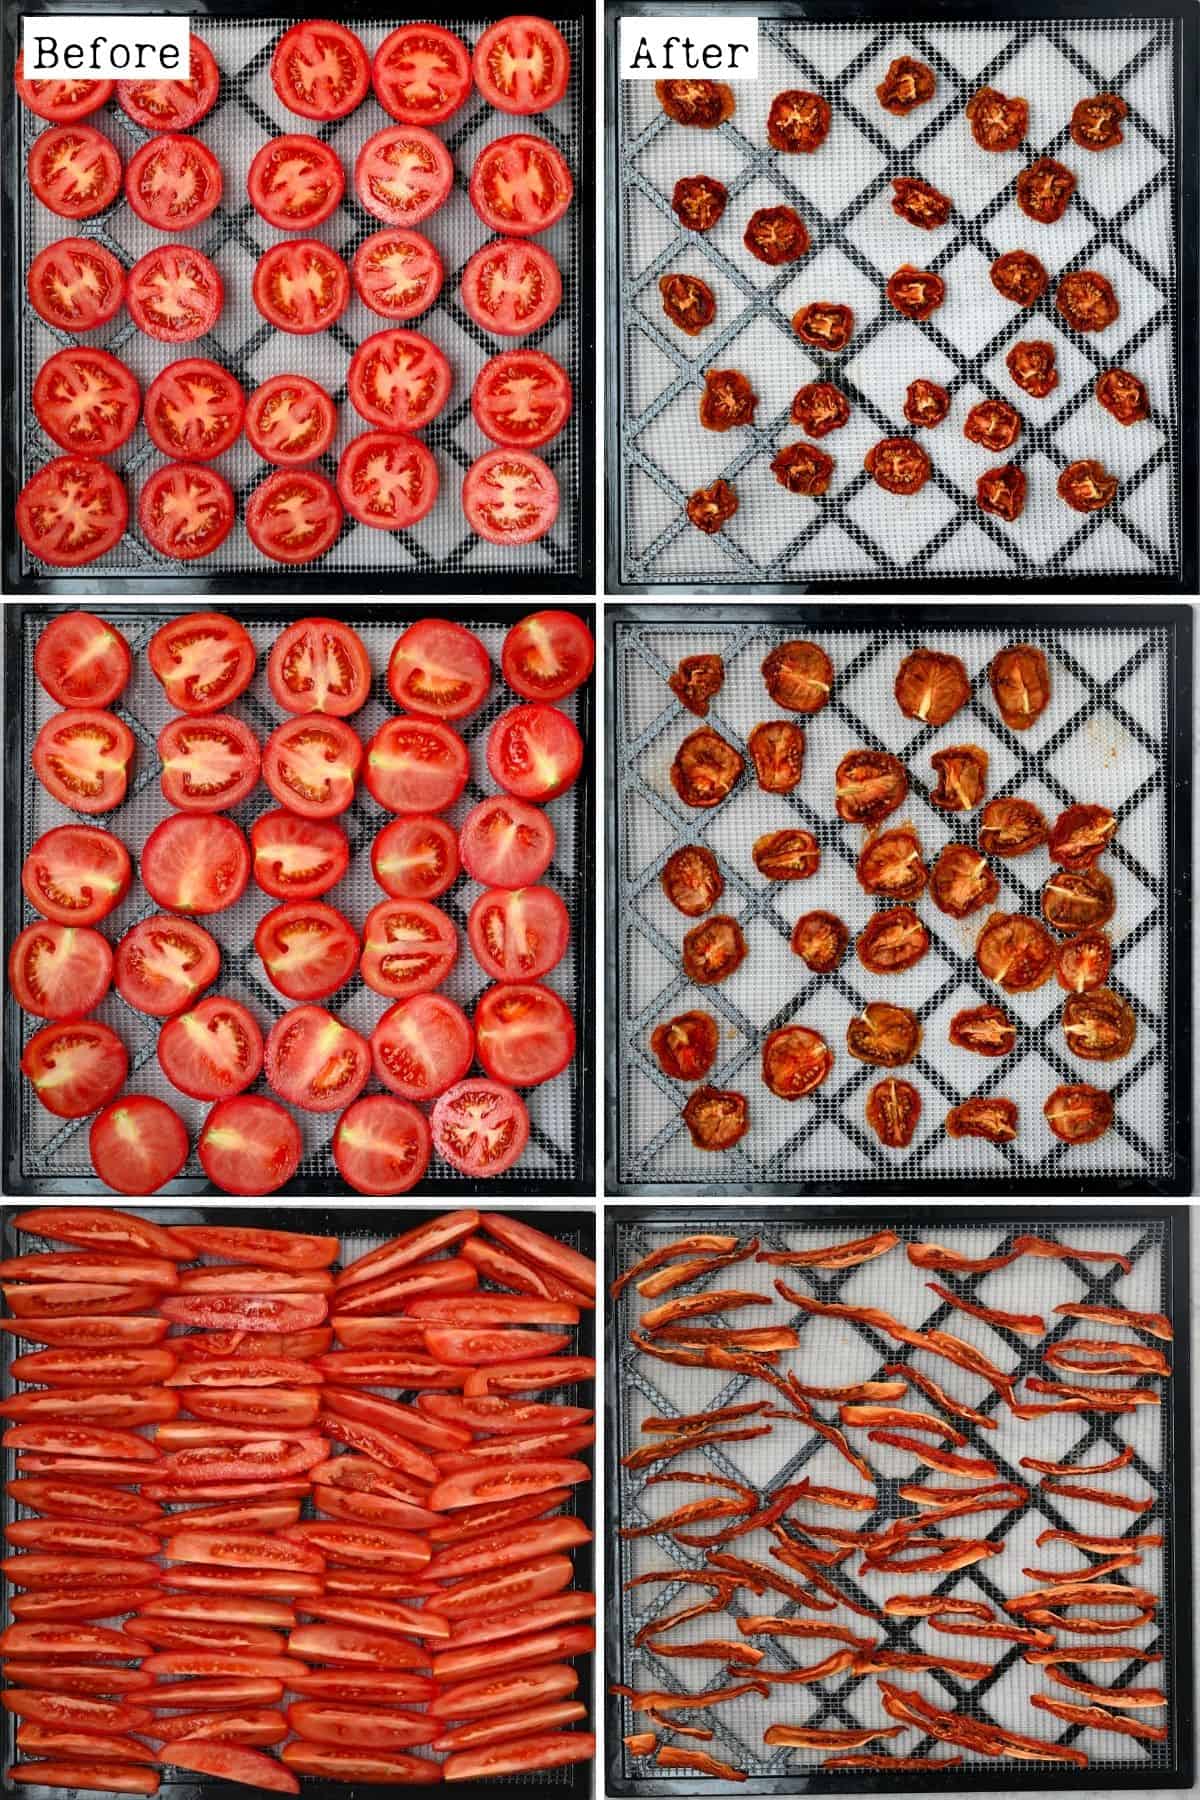 Before and after dehydrating tomato slices